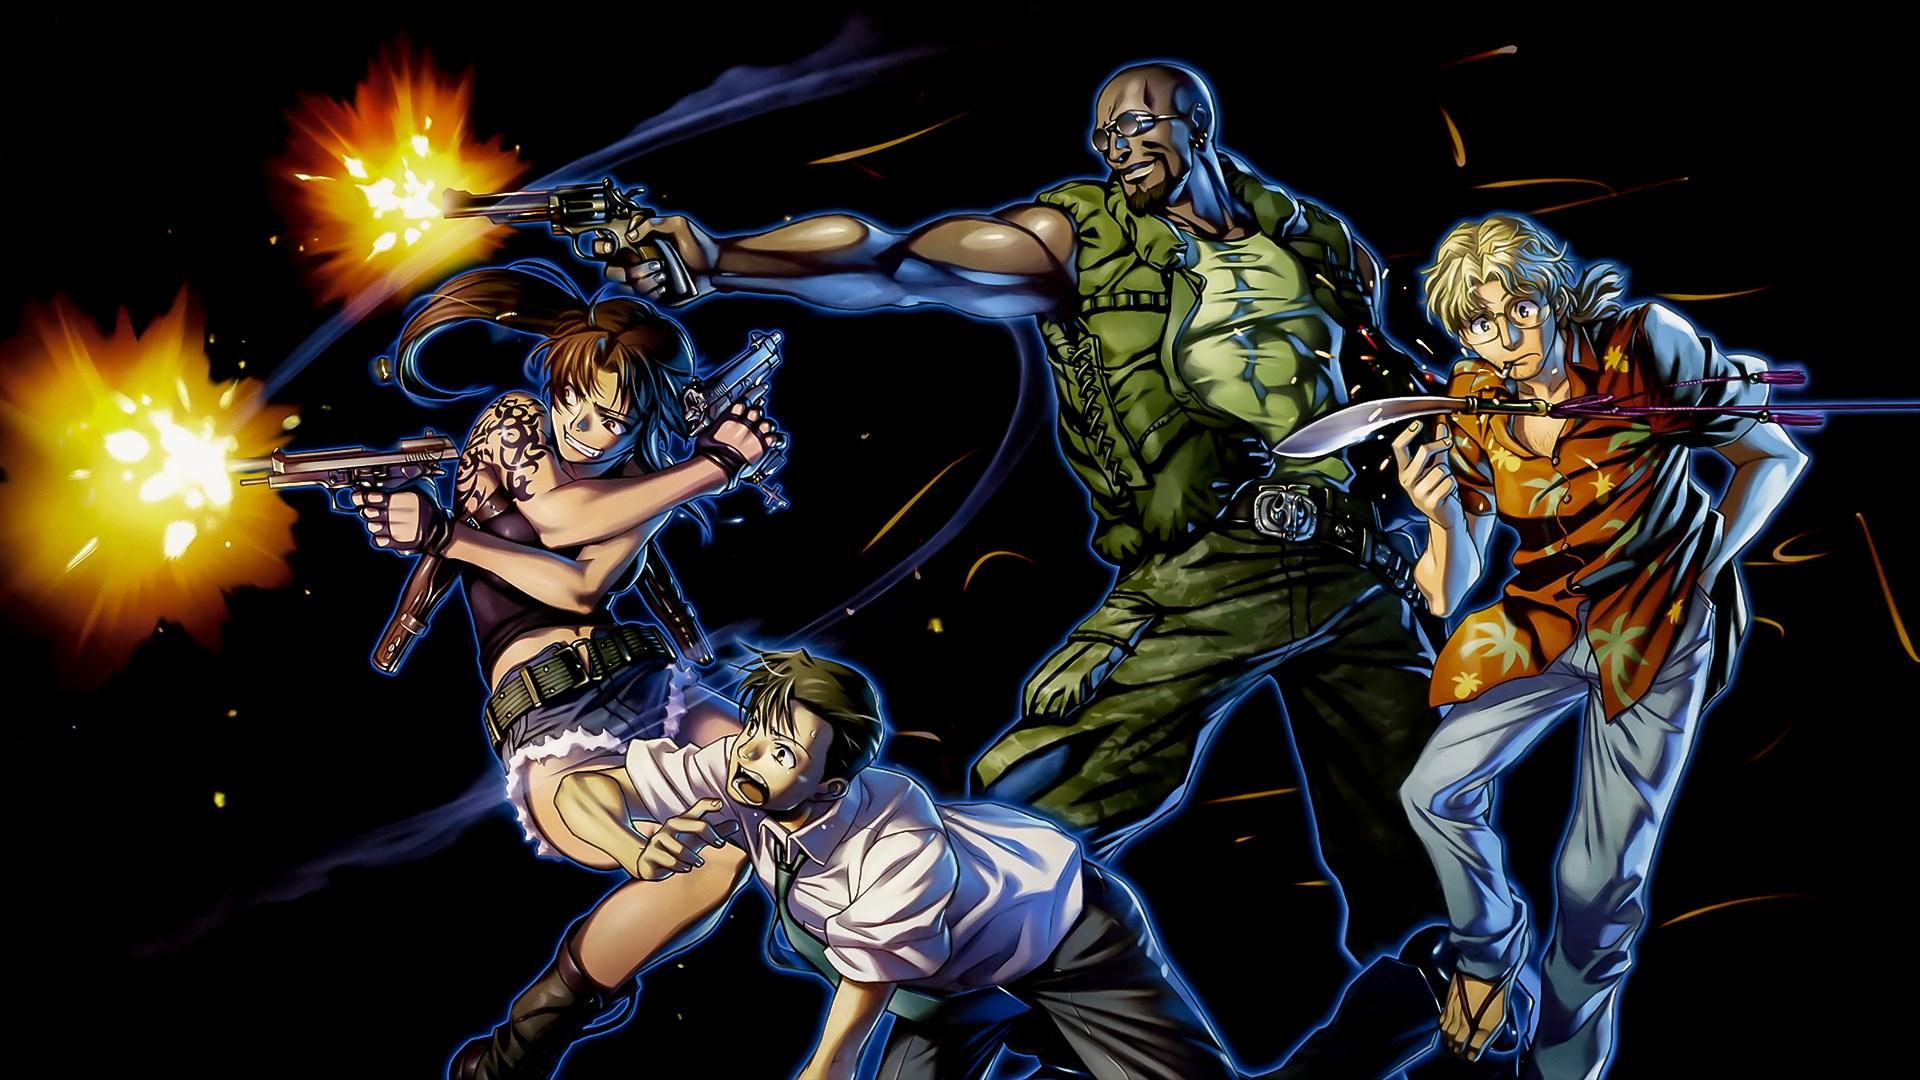 15 Black Lagoon Wallpaper Hd Pictures The Pooh Wall